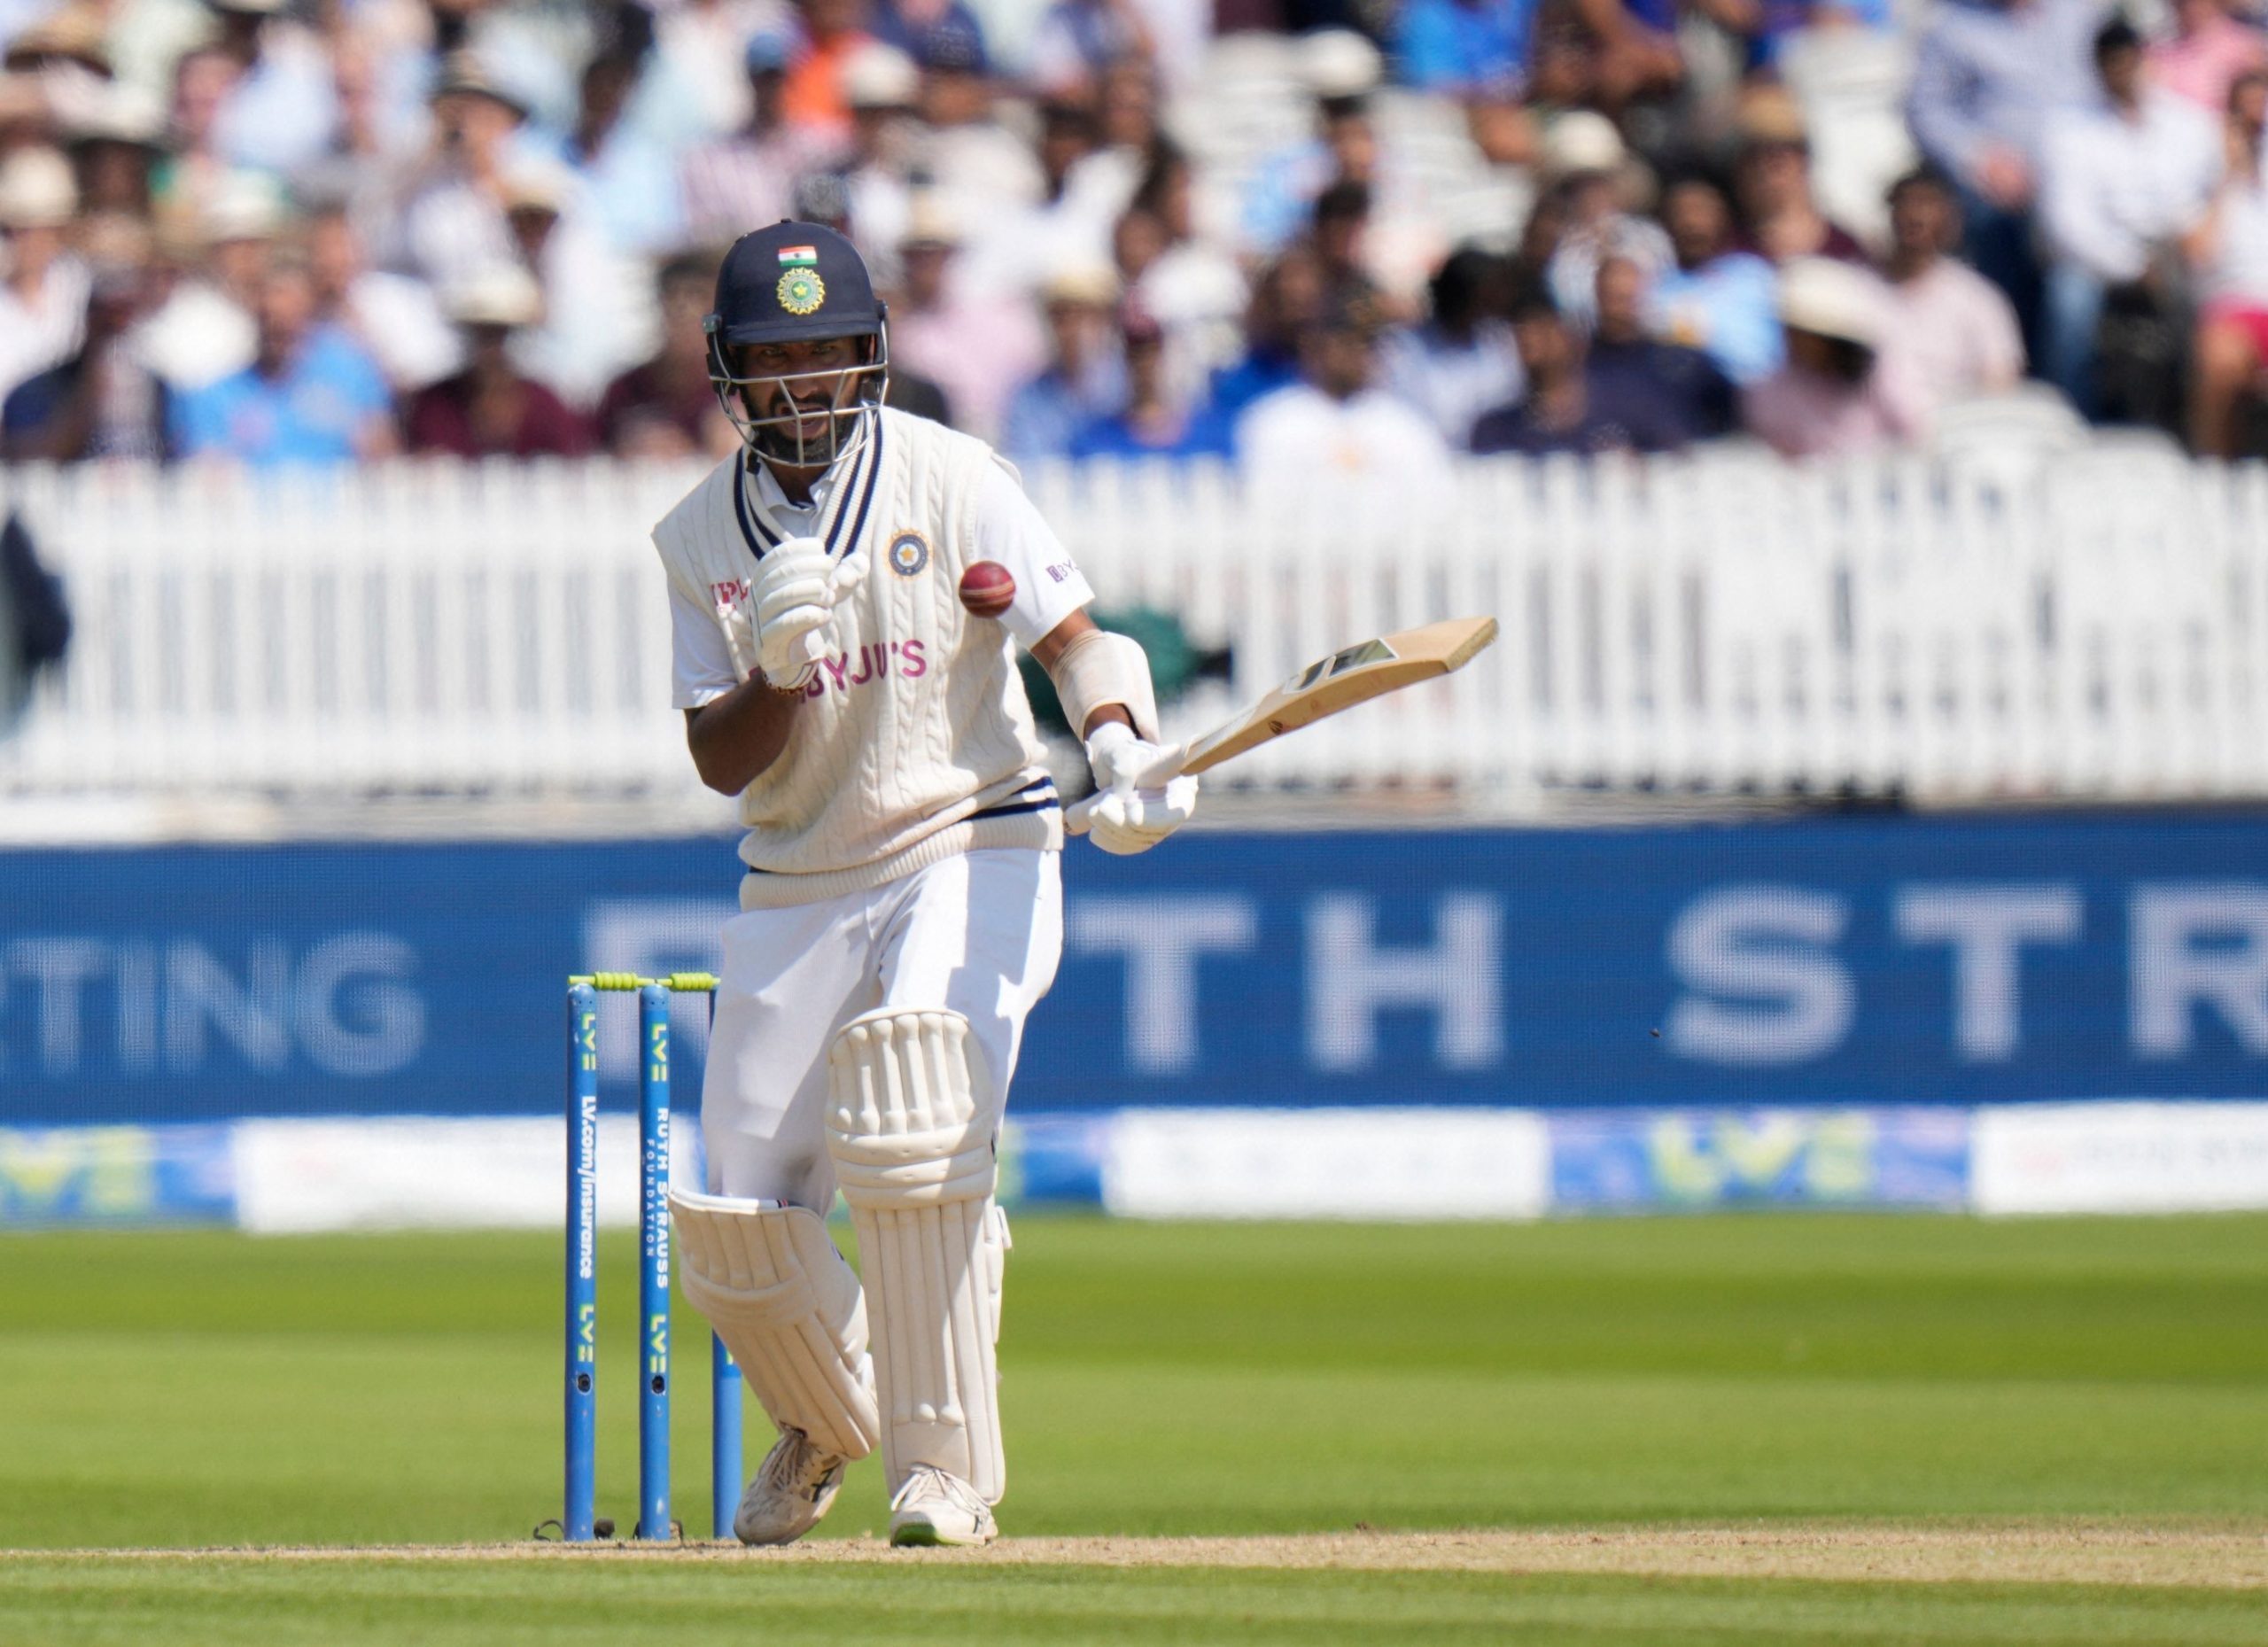 2nd Test: India lead England by 78 runs at tea on Day 4